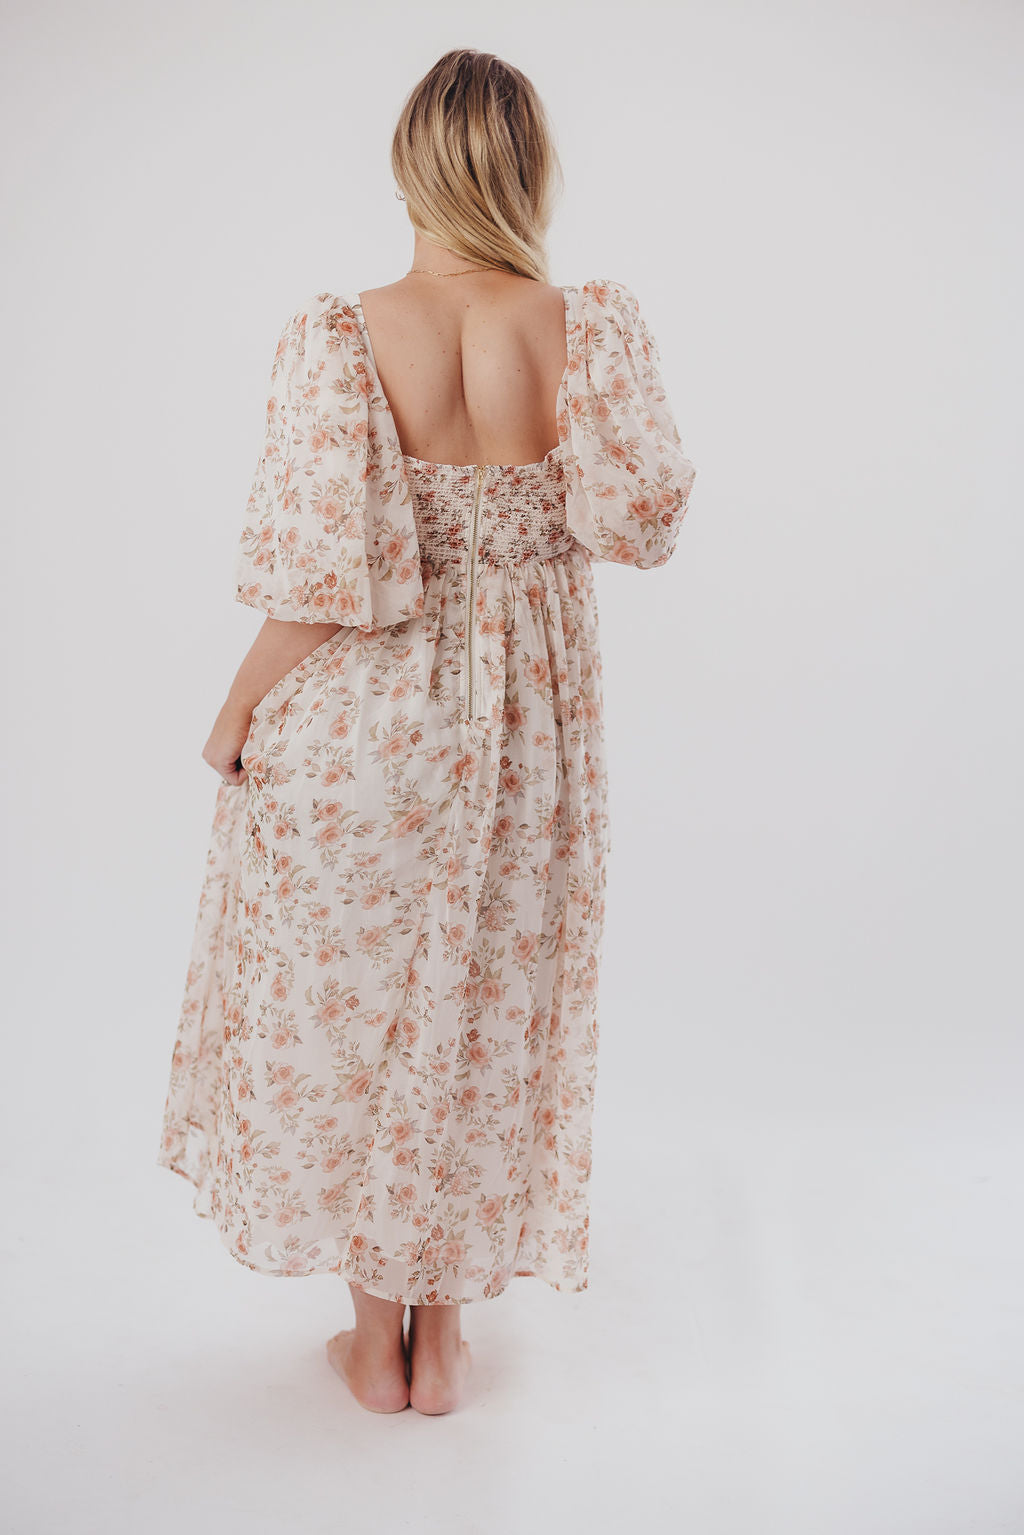 Harlow Maxi Dress in Ivory Floral - Bump Friendly & Inclusive Sizing (S-3XL)